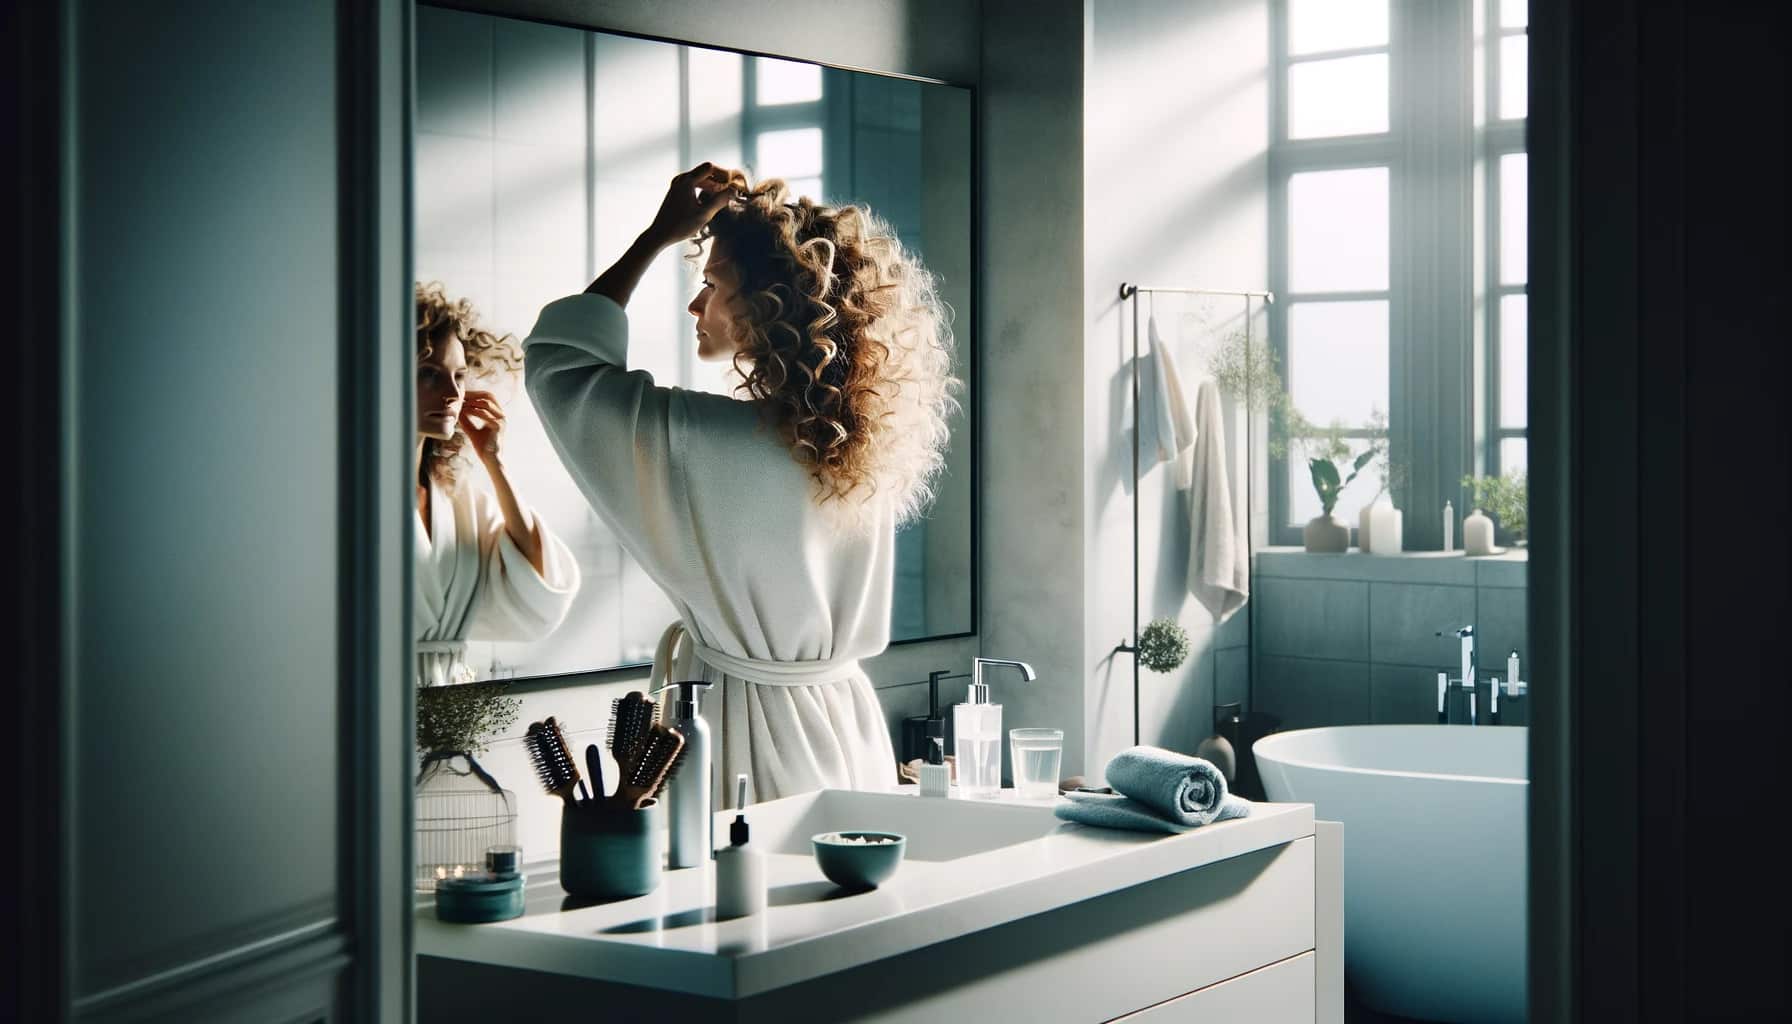 A woman with curly hair is standing in front of the mirror, styling her day two curls with her fingers.